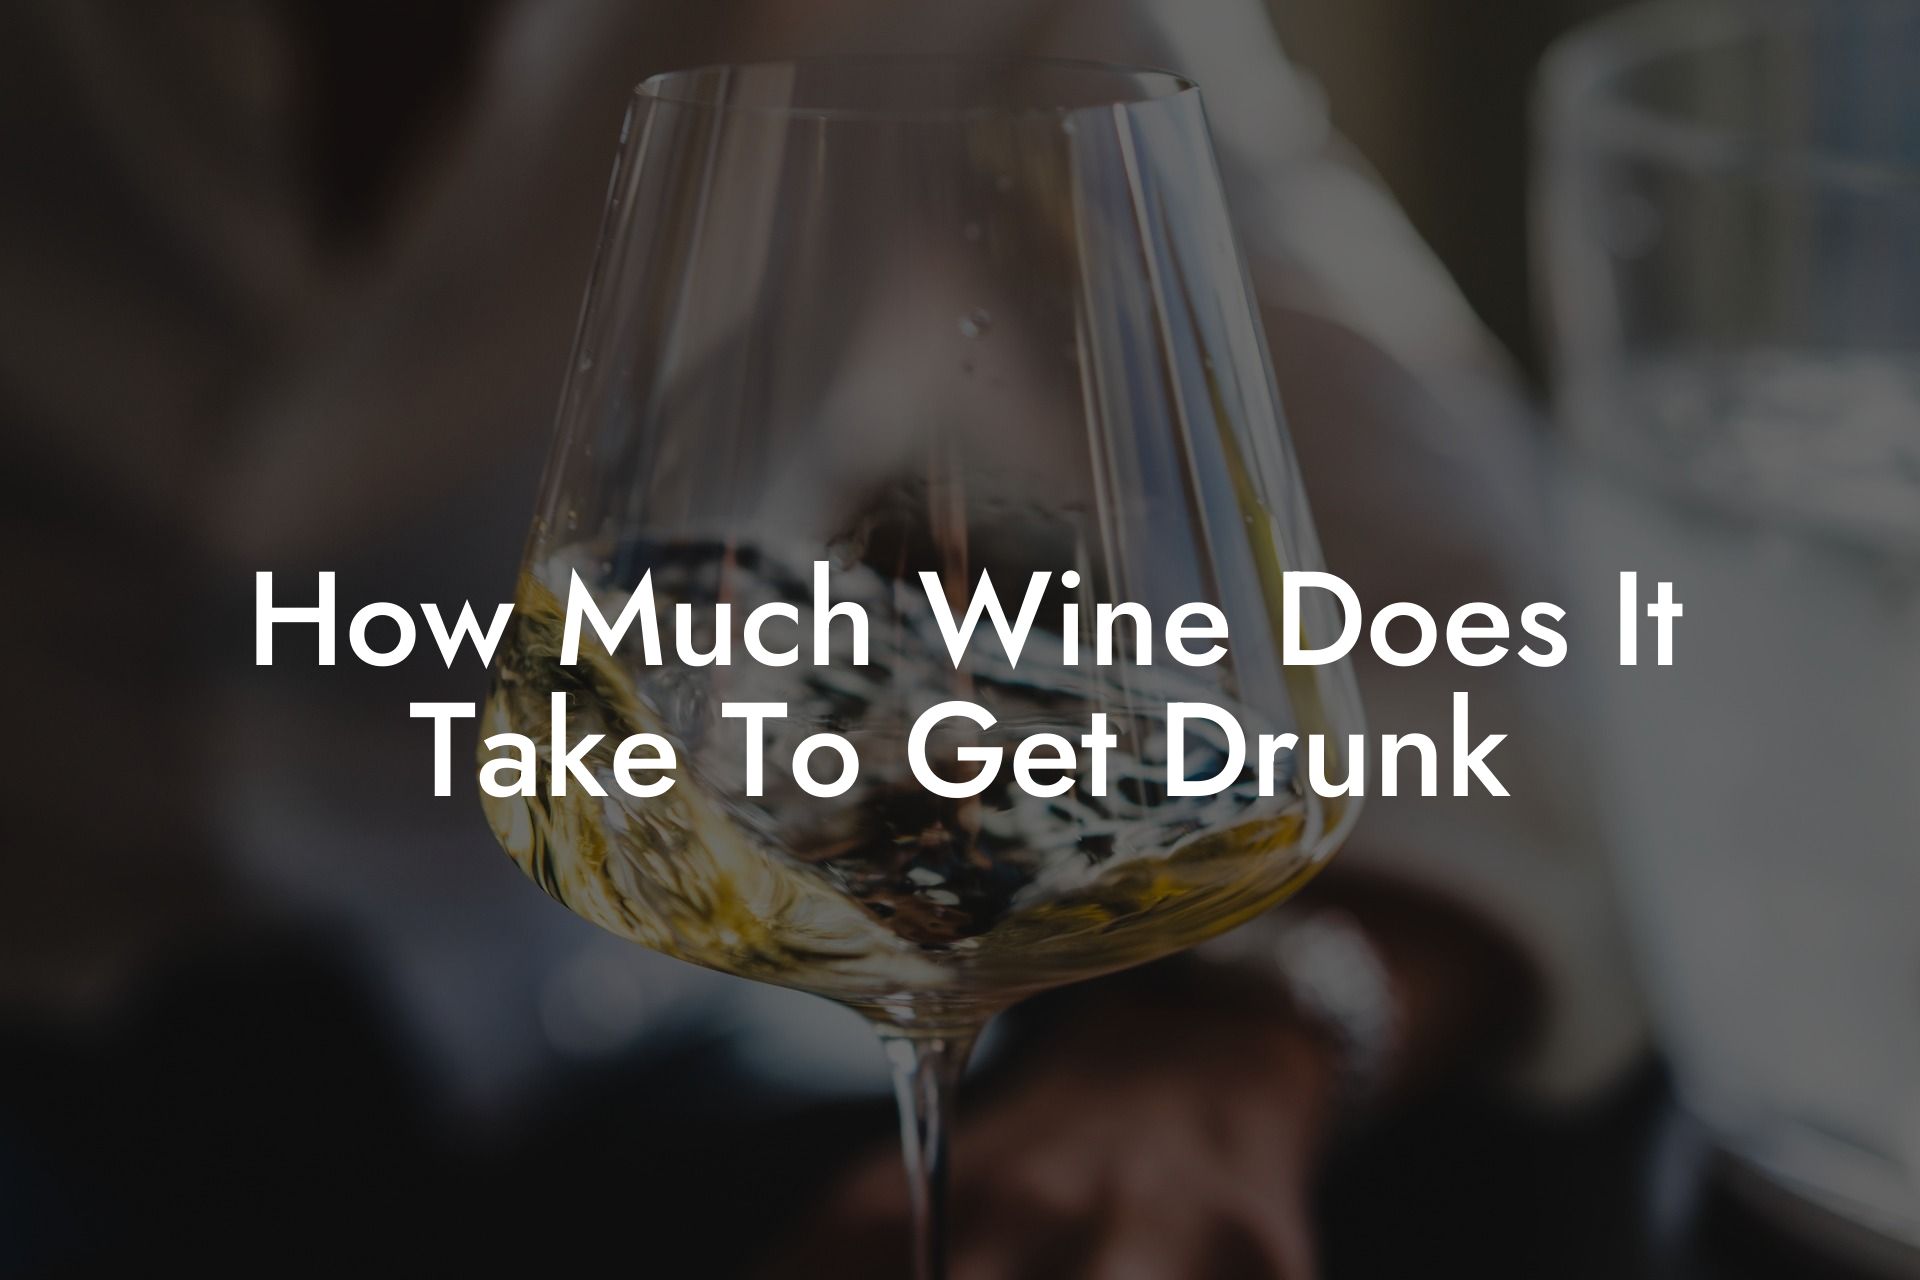 How Much Wine Does It Take To Get Drunk